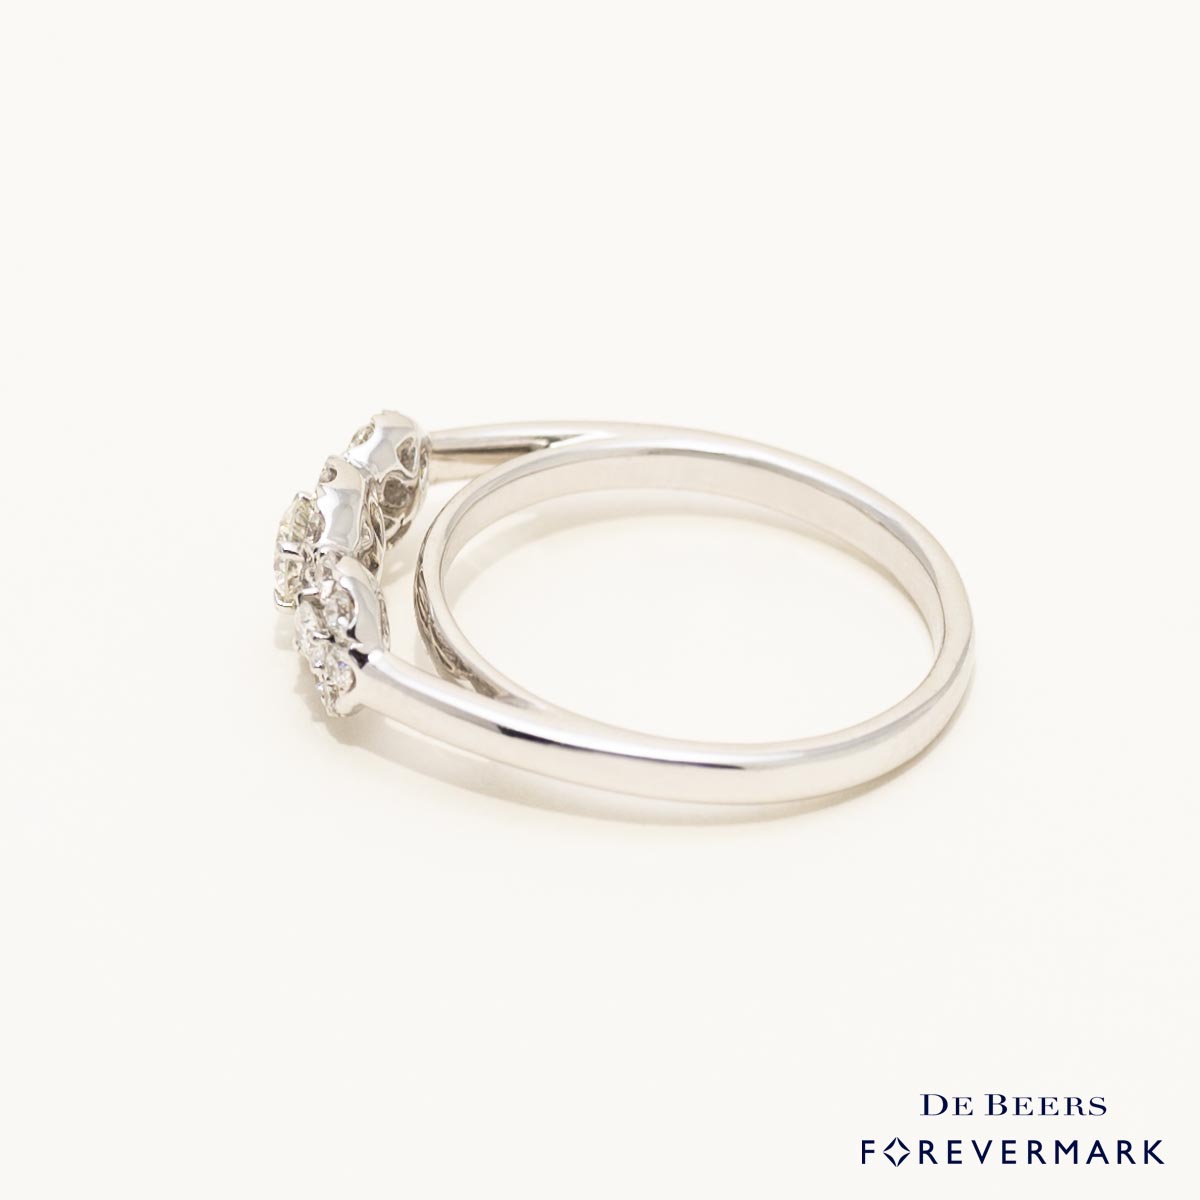 De Beers Forevermark Center of my Universe Diamond Three Stone Halo Ring in 18kt White Gold (5/8ct tw)